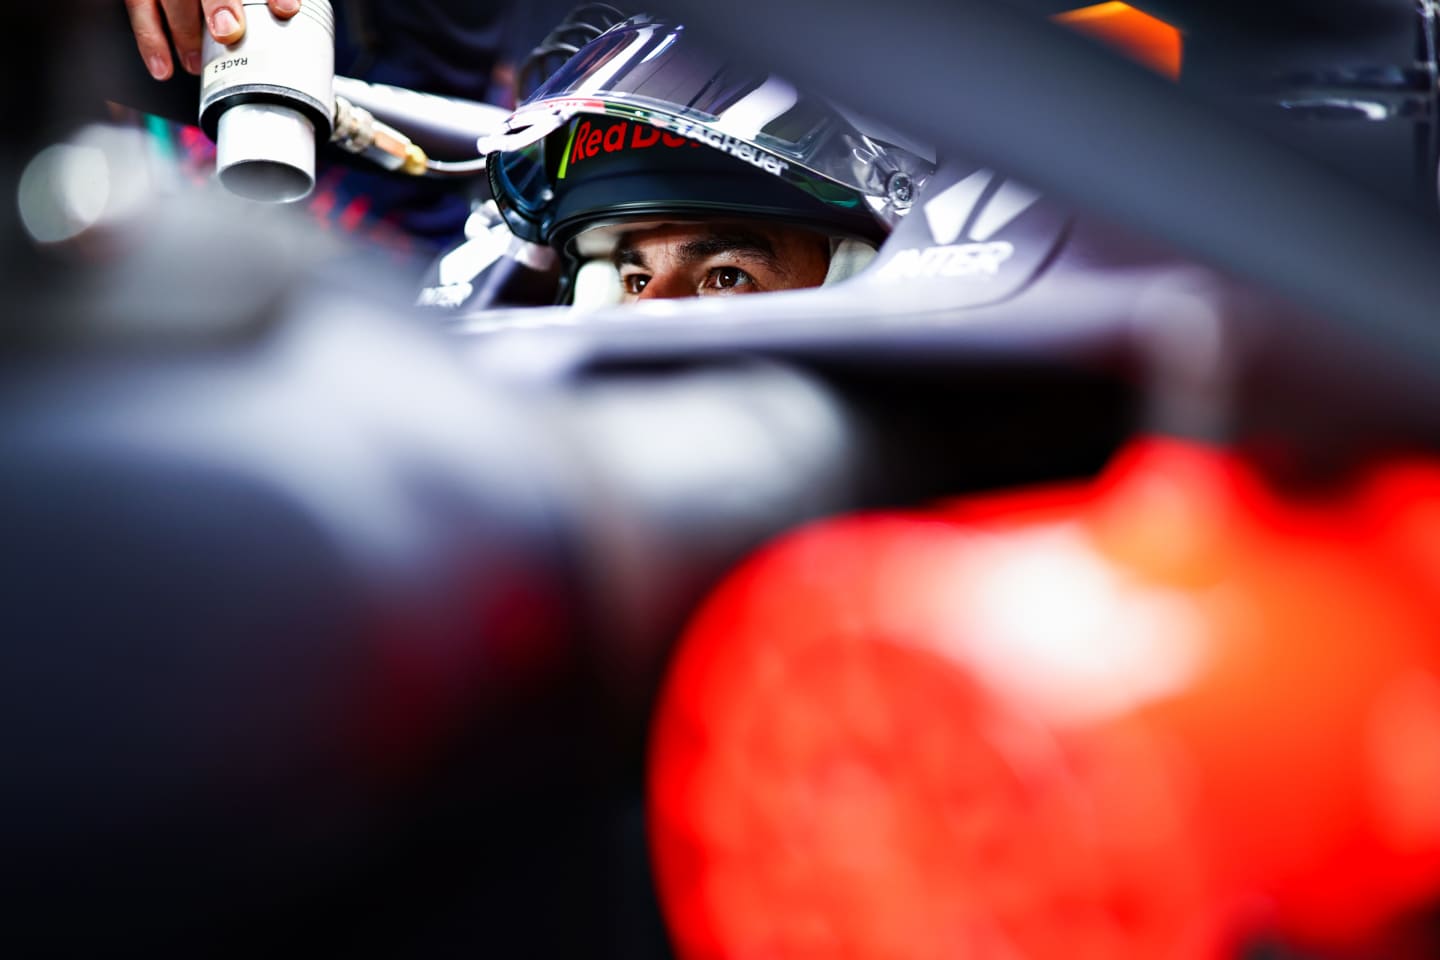 DOHA, QATAR - NOVEMBER 19: Sergio Perez of Mexico and Red Bull Racing prepares to drive in the garage during practice ahead of the F1 Grand Prix of Qatar at Losail International Circuit on November 19, 2021 in Doha, Qatar. (Photo by Mark Thompson/Getty Images)